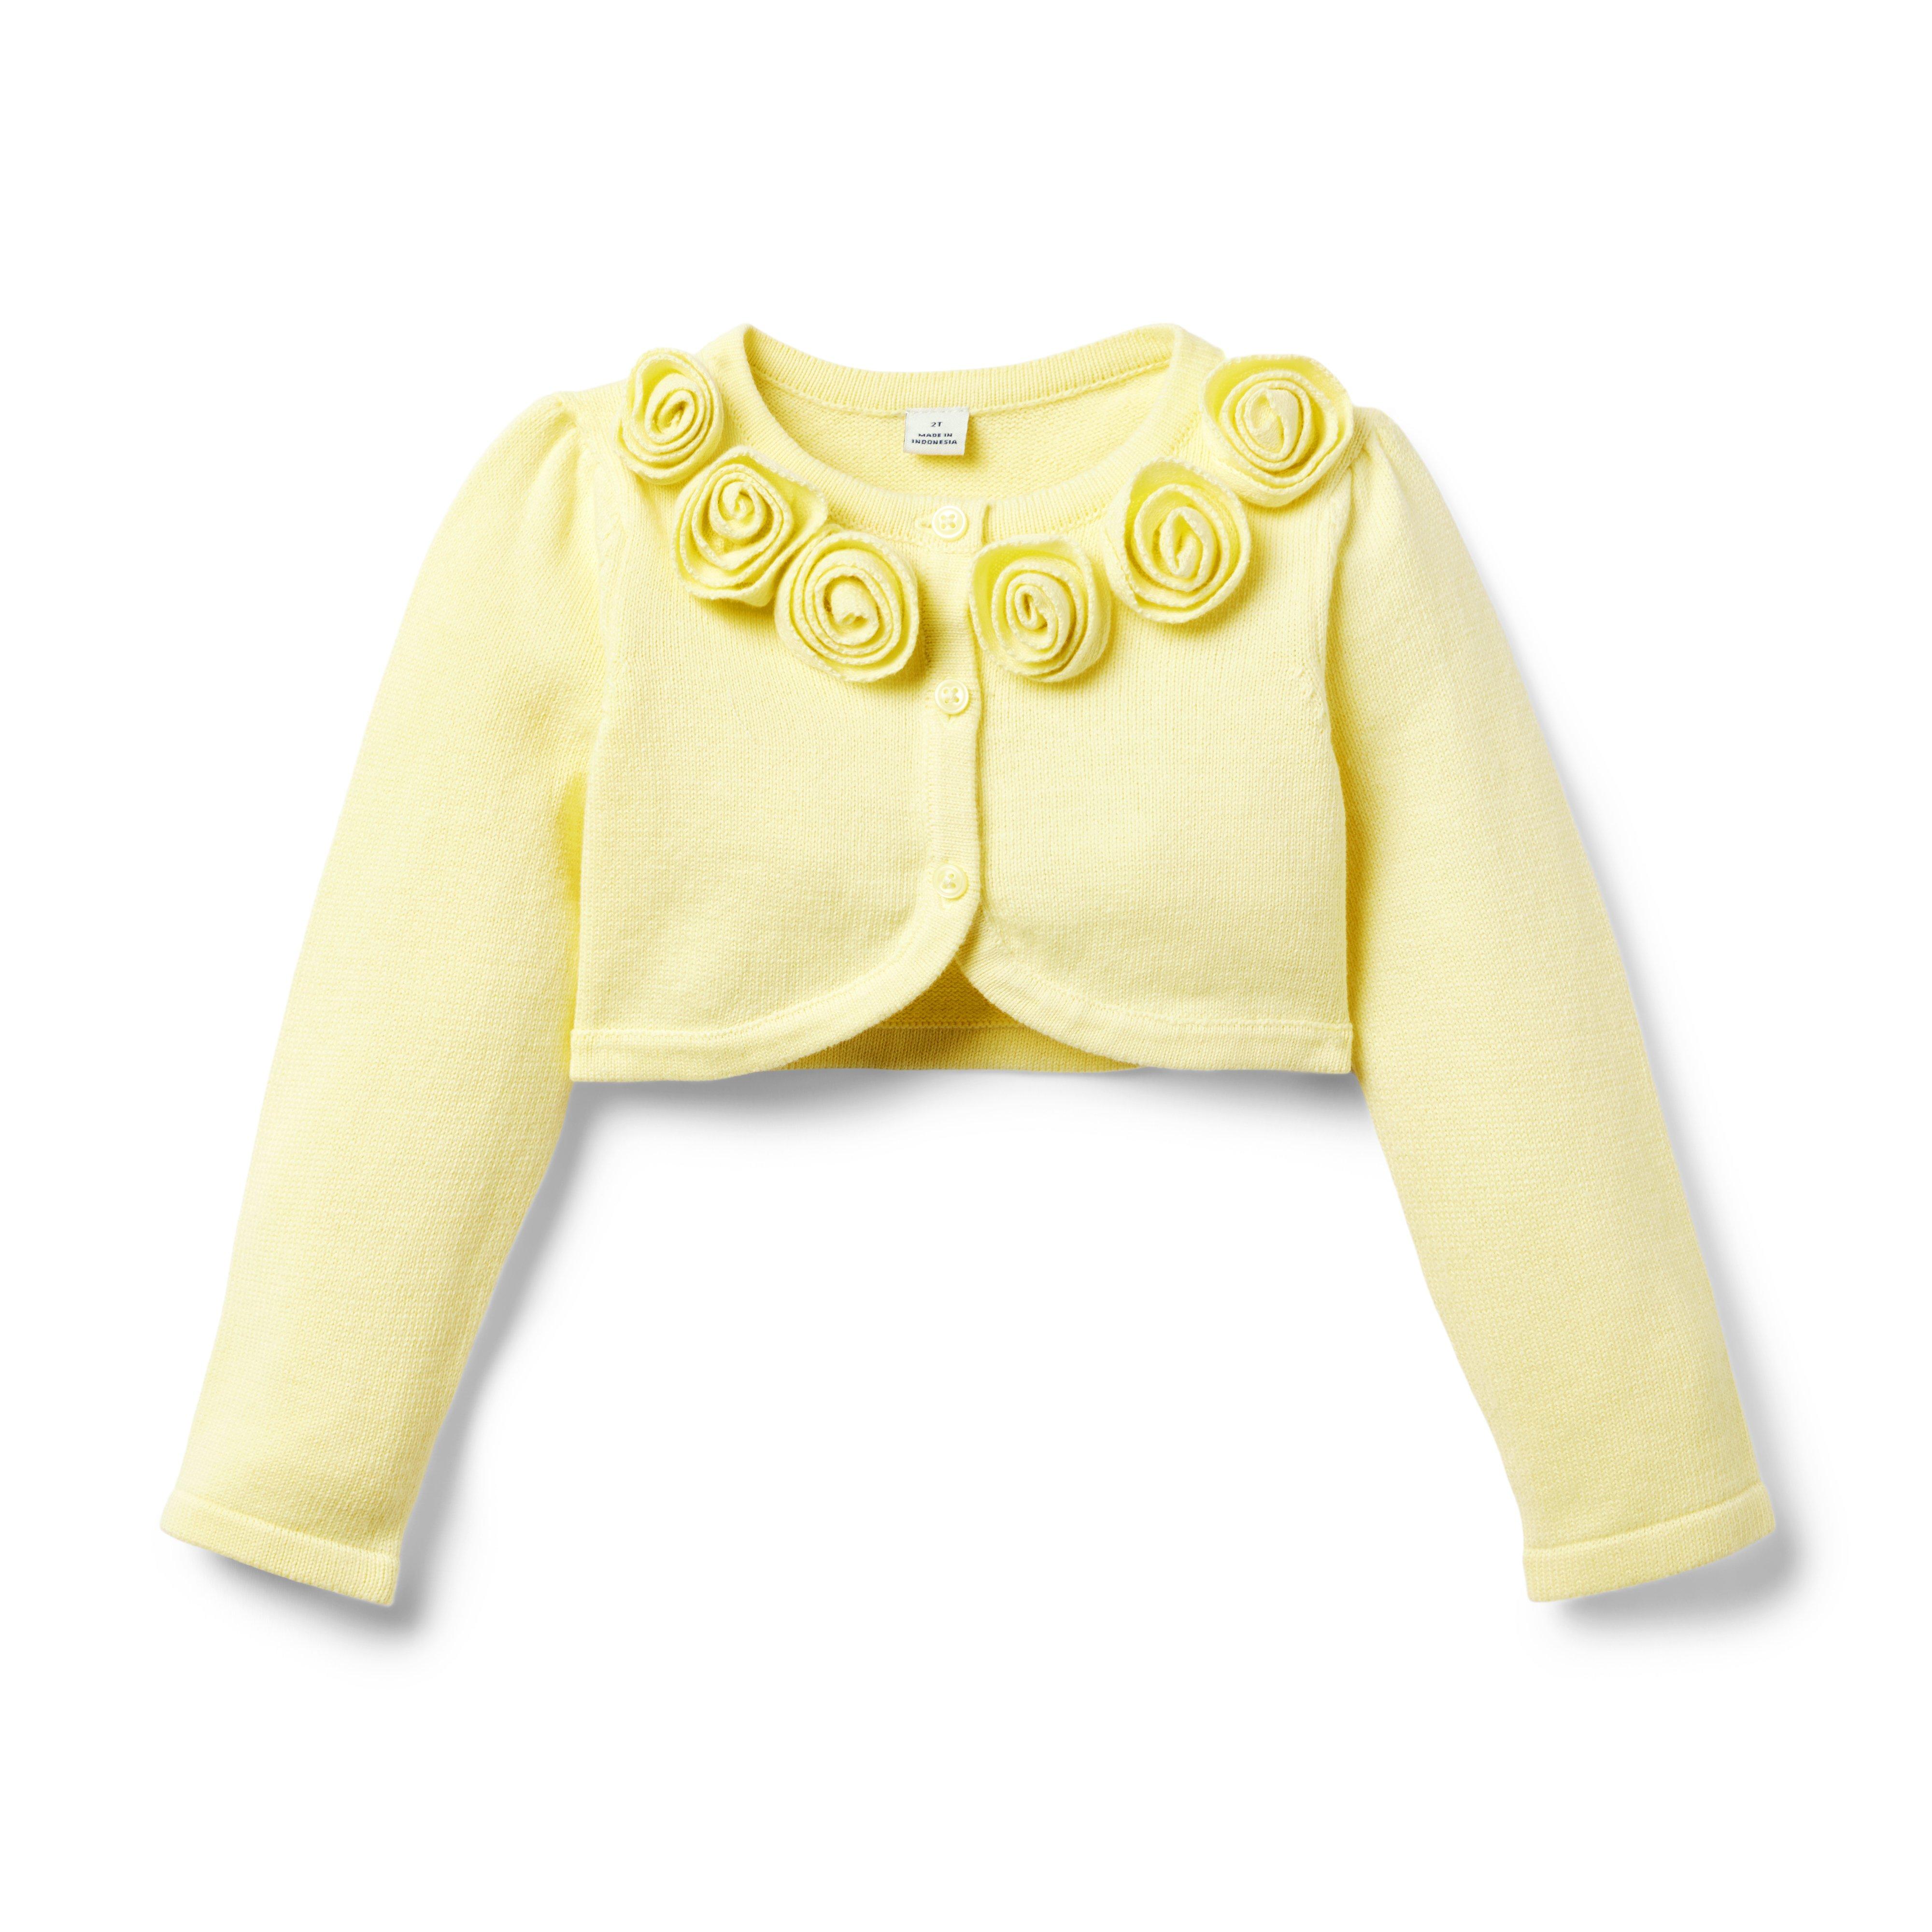 The Rosette Cropped Cardigan